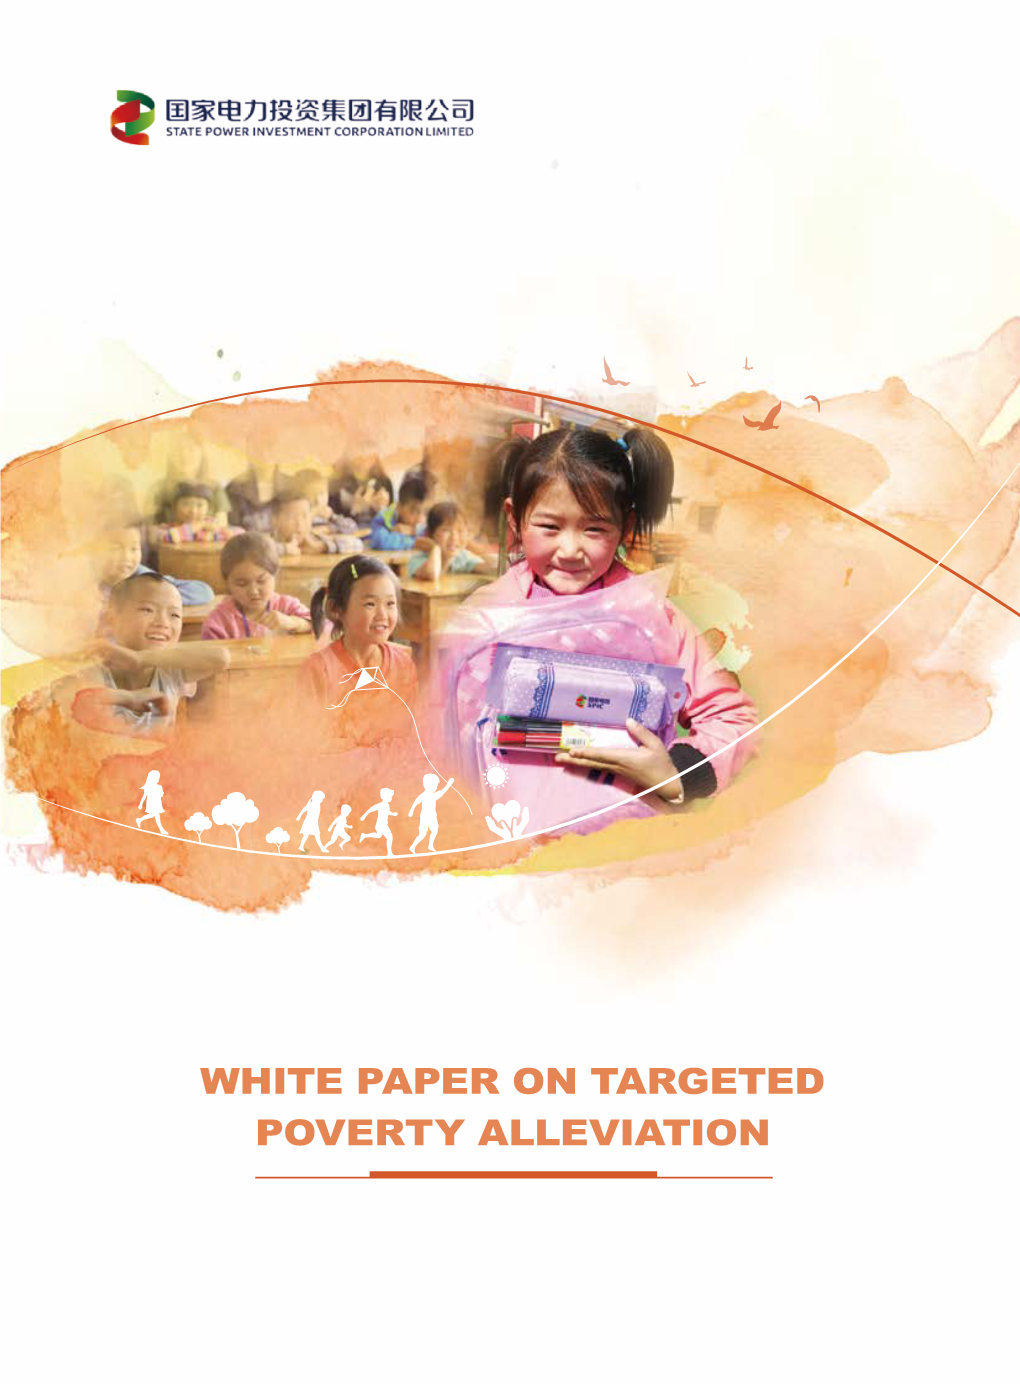 SPIC Whitepaper on Targeted Poverty Alleviation